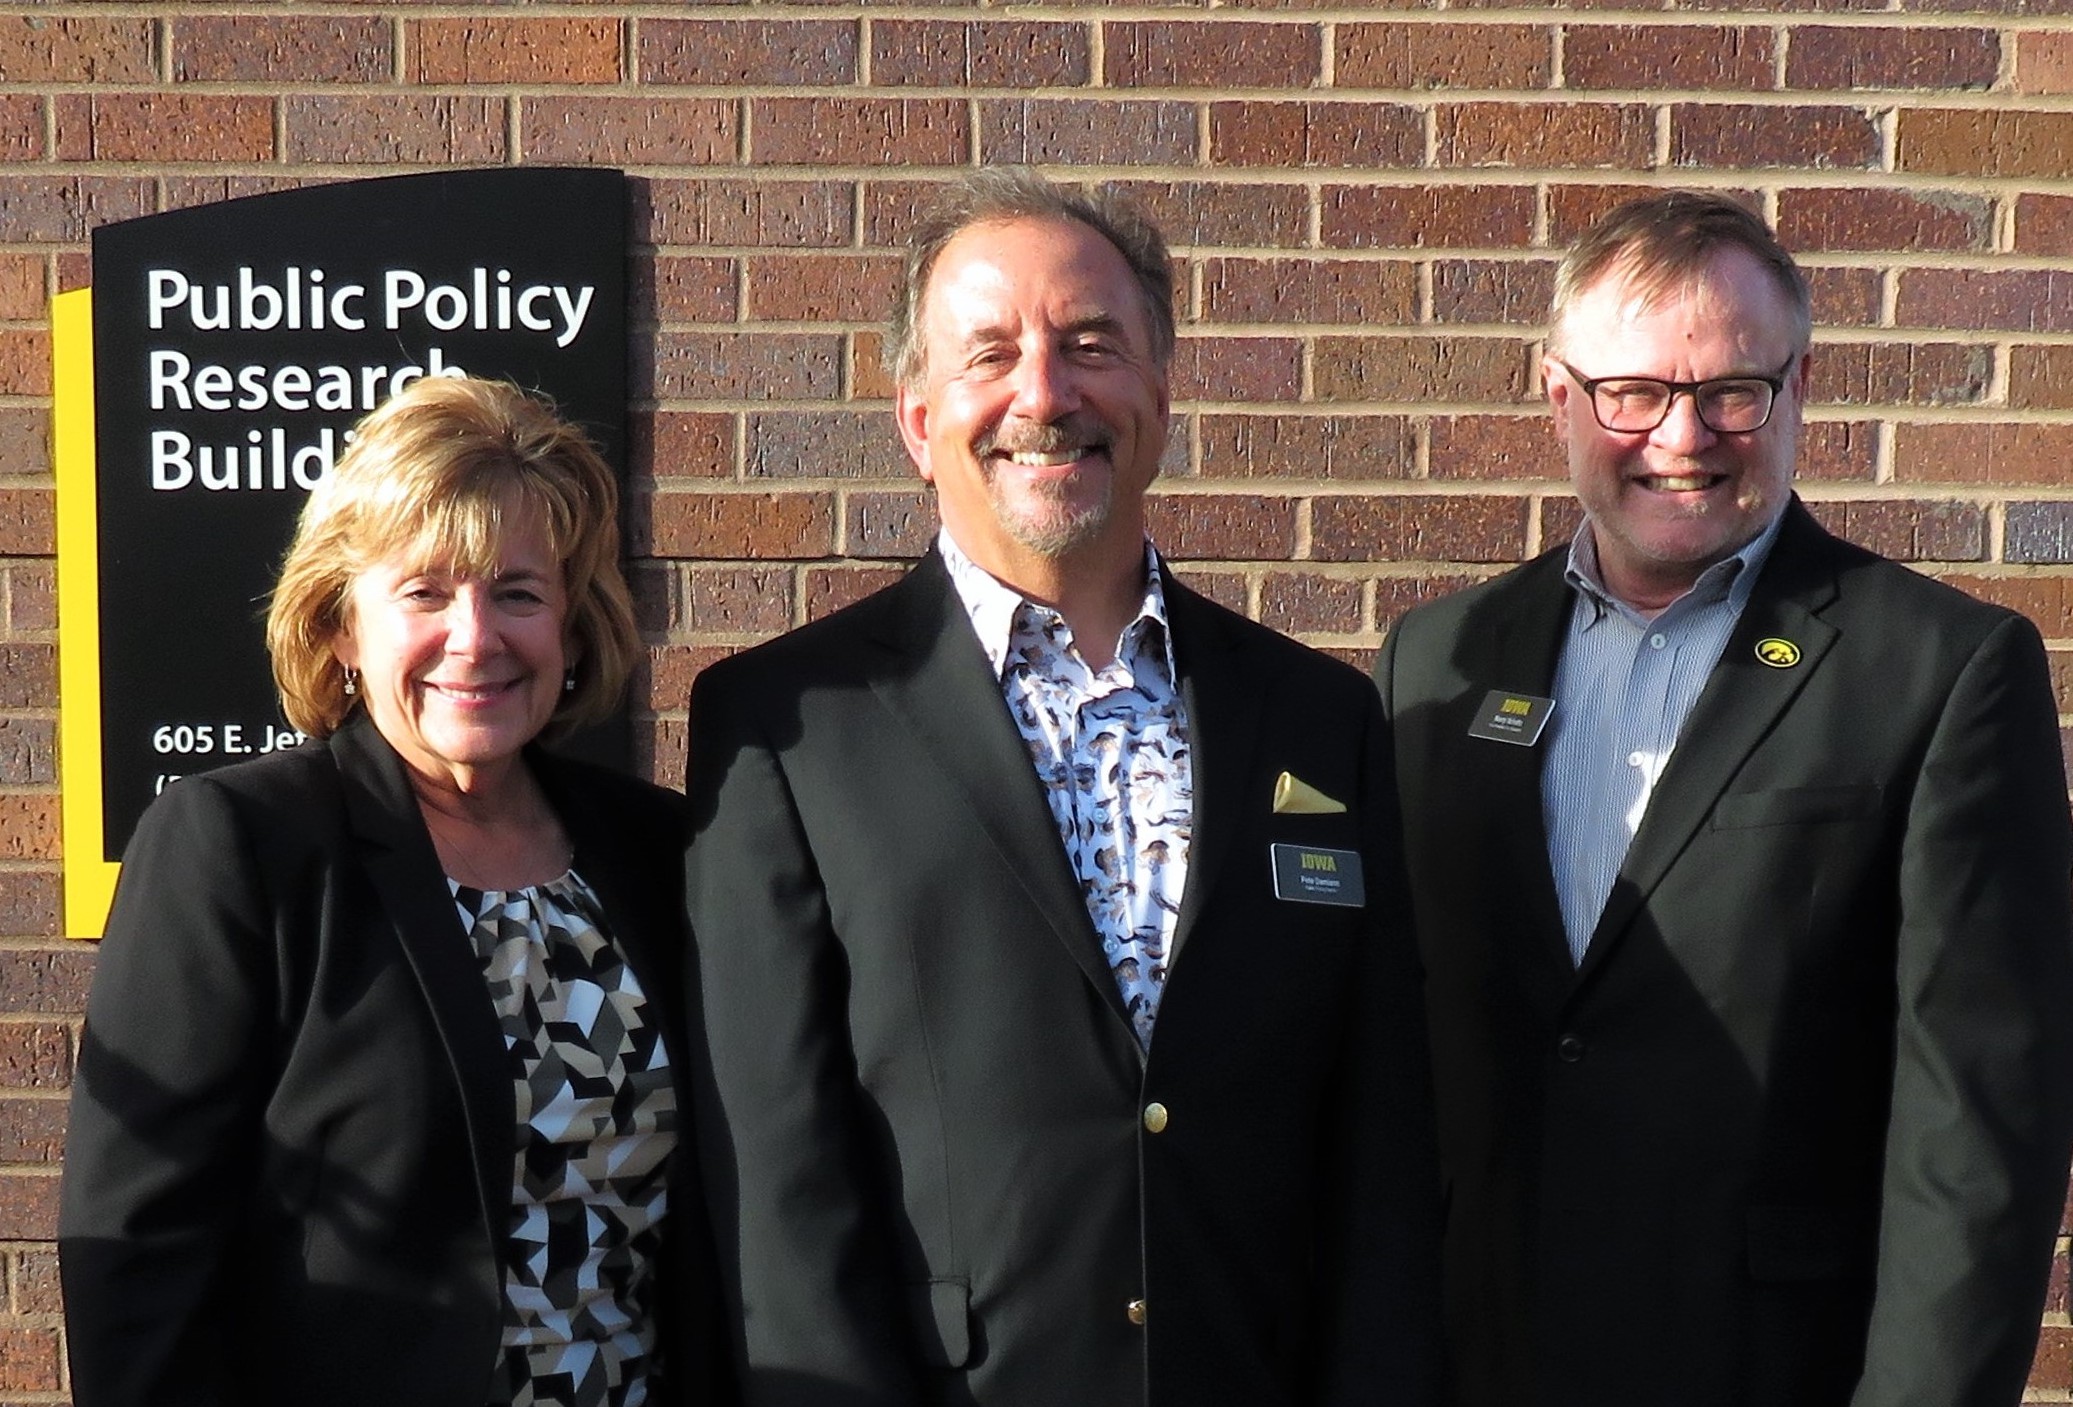 University President Barbara Wilson, Public Policy Center Director Peter Damiano, and Vice President for Research Marty Scholtz stand in front of the newly opened Public Policy Research Building